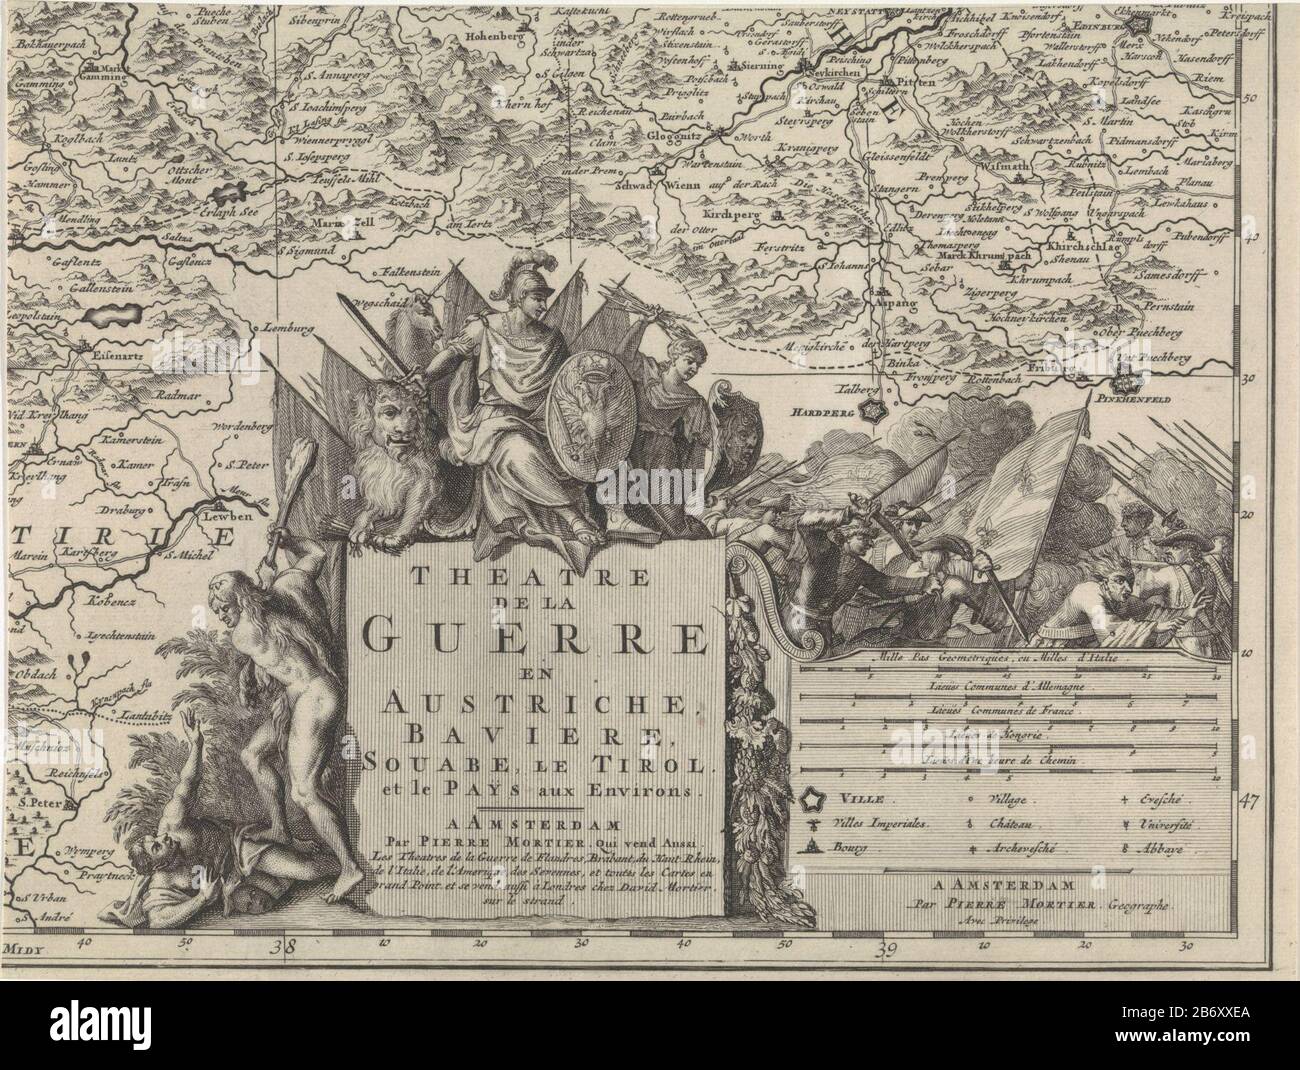 Kaart van het noordoosten van Oostenrijk (blad rechtsonder) Teatre de la Guerre en Austriche, Baviere, Souabe, le Tirol et le Pays aux Environs (titel op object) The title and legend of a map of Austria, Bavaria, Swabia and Tyrol. Leaf bottom right of the area to the northeast of Austria above and left. To the left of the title a wild man who beats a man with his club, who ns mask has fallen. Above the title allegorical figure with a heavy: d and shield, showing a two-headed eagle with sword. Left the Dutch lion, right, a woman with a bundle of arrows and a shield with Aegirkop. Above the key Stock Photo